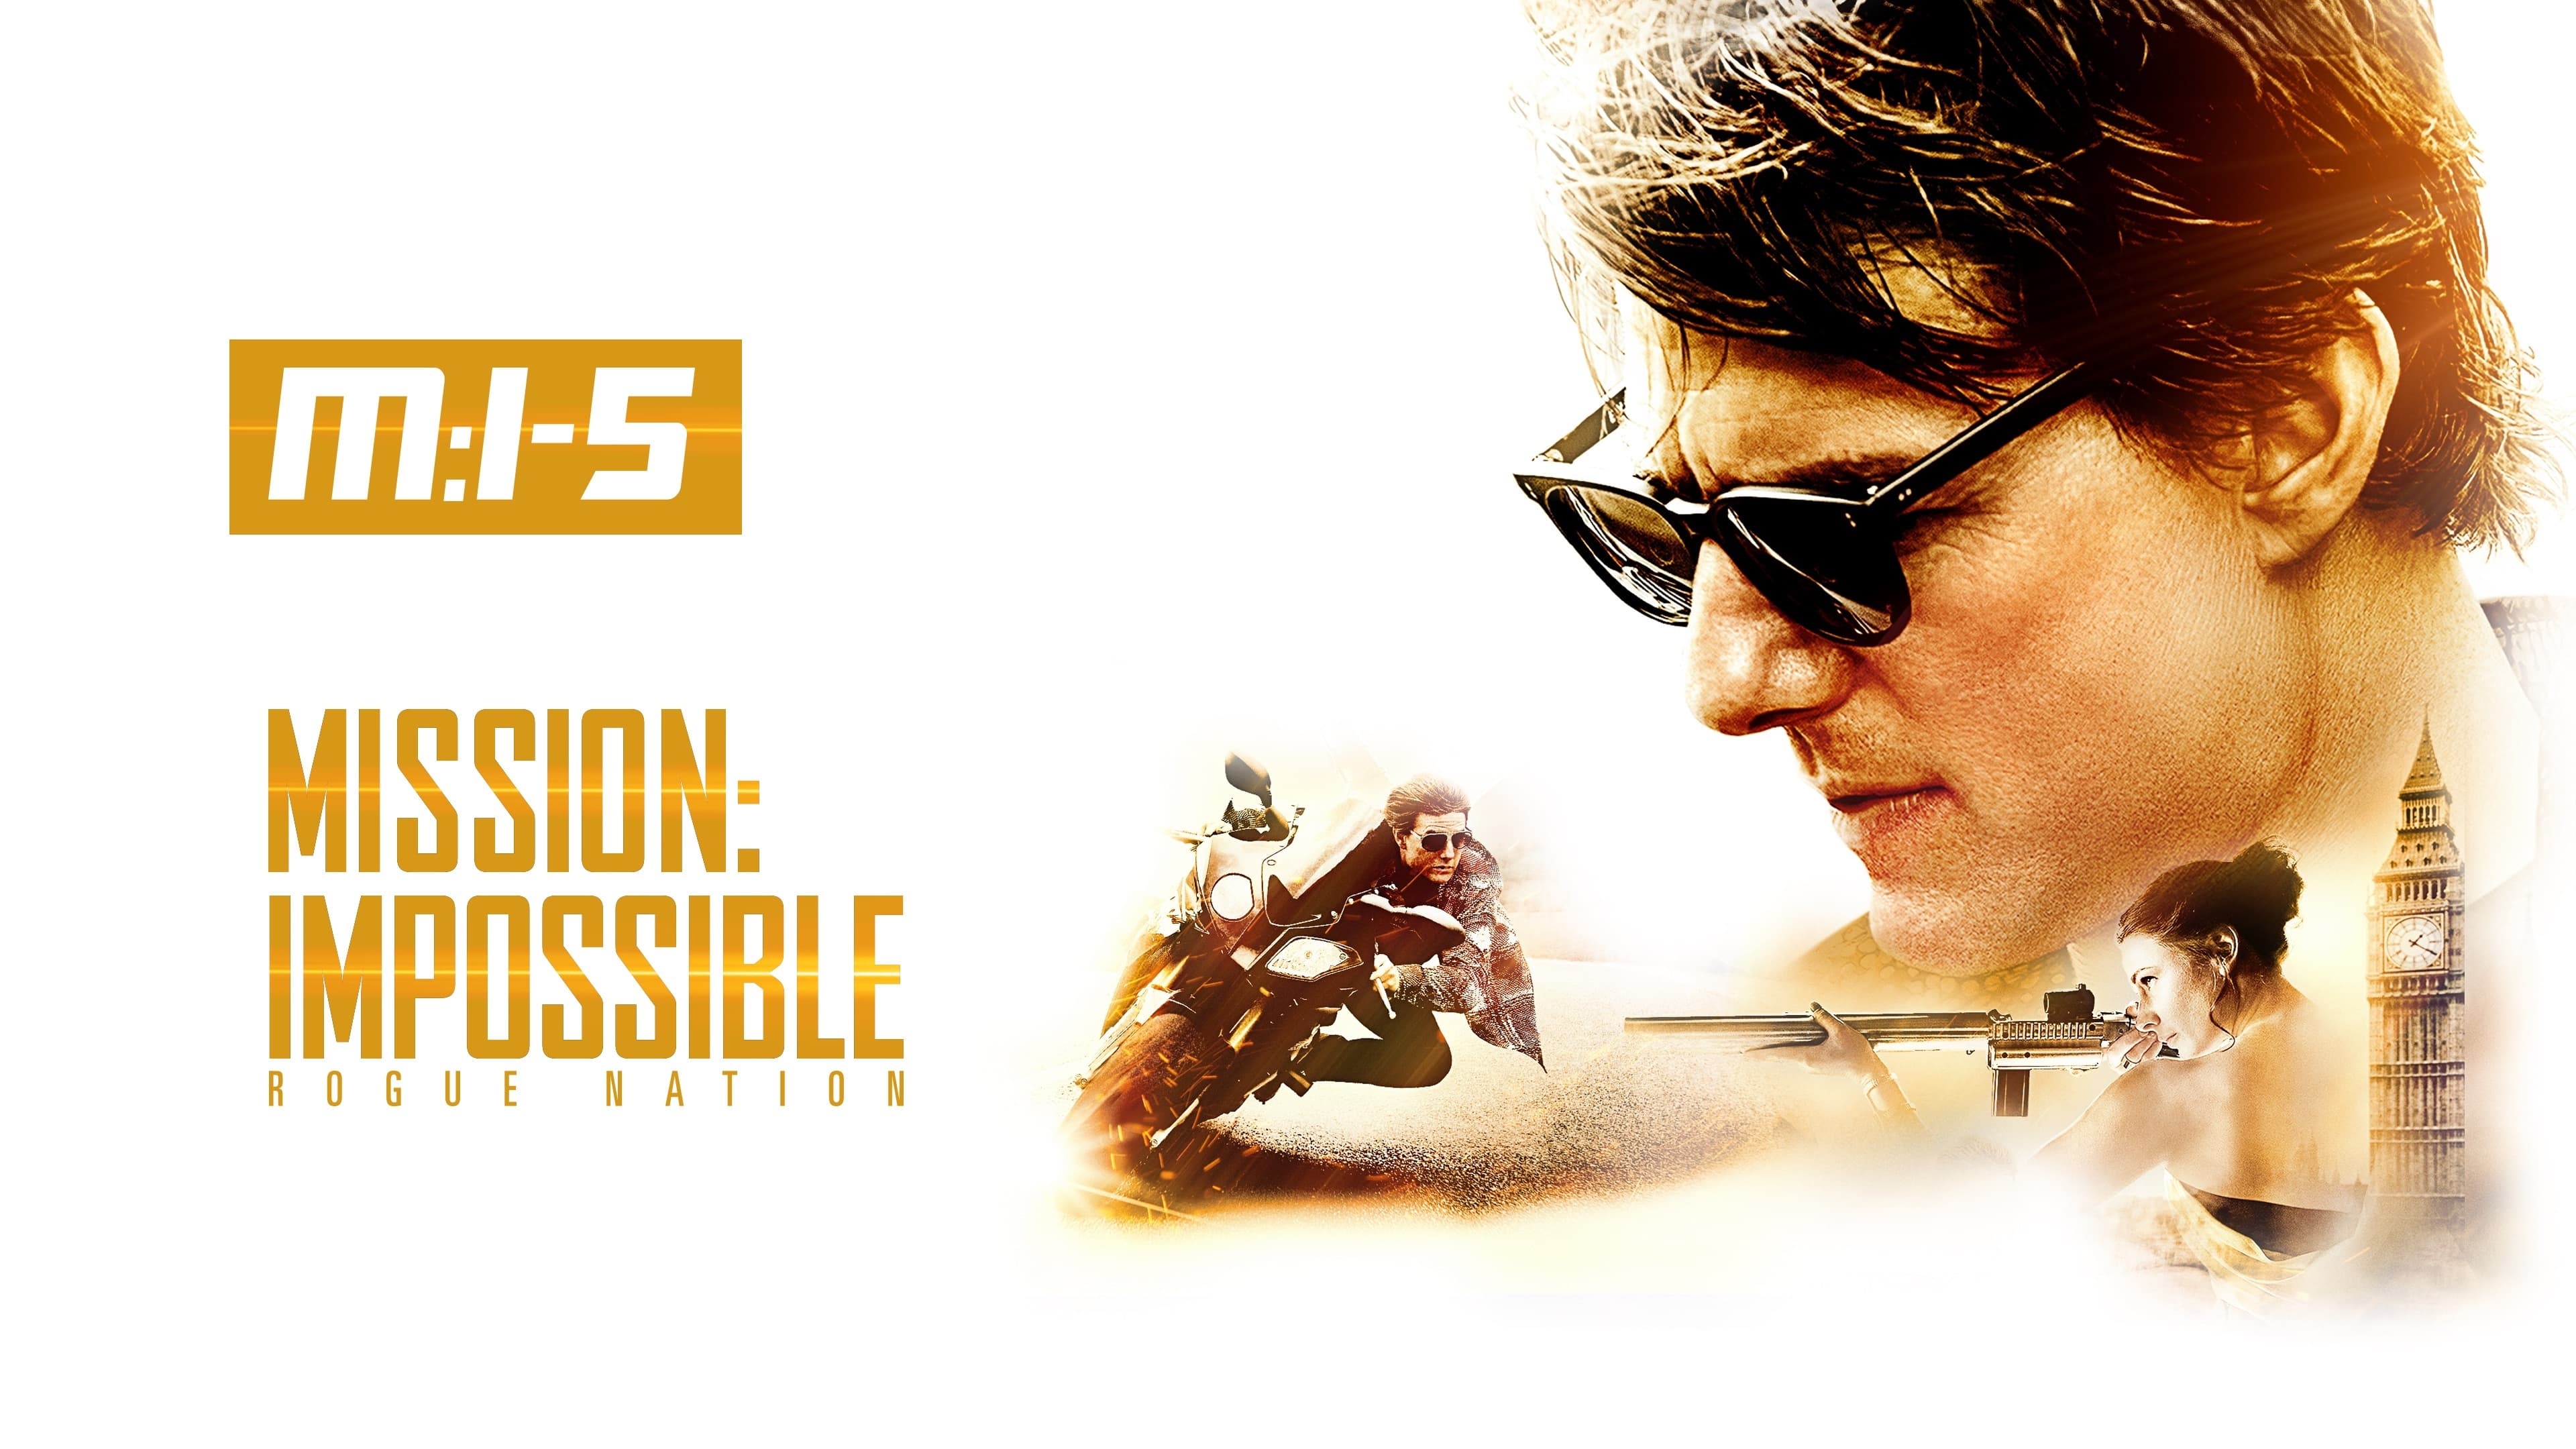 Mission: Impossible 5 (2015)